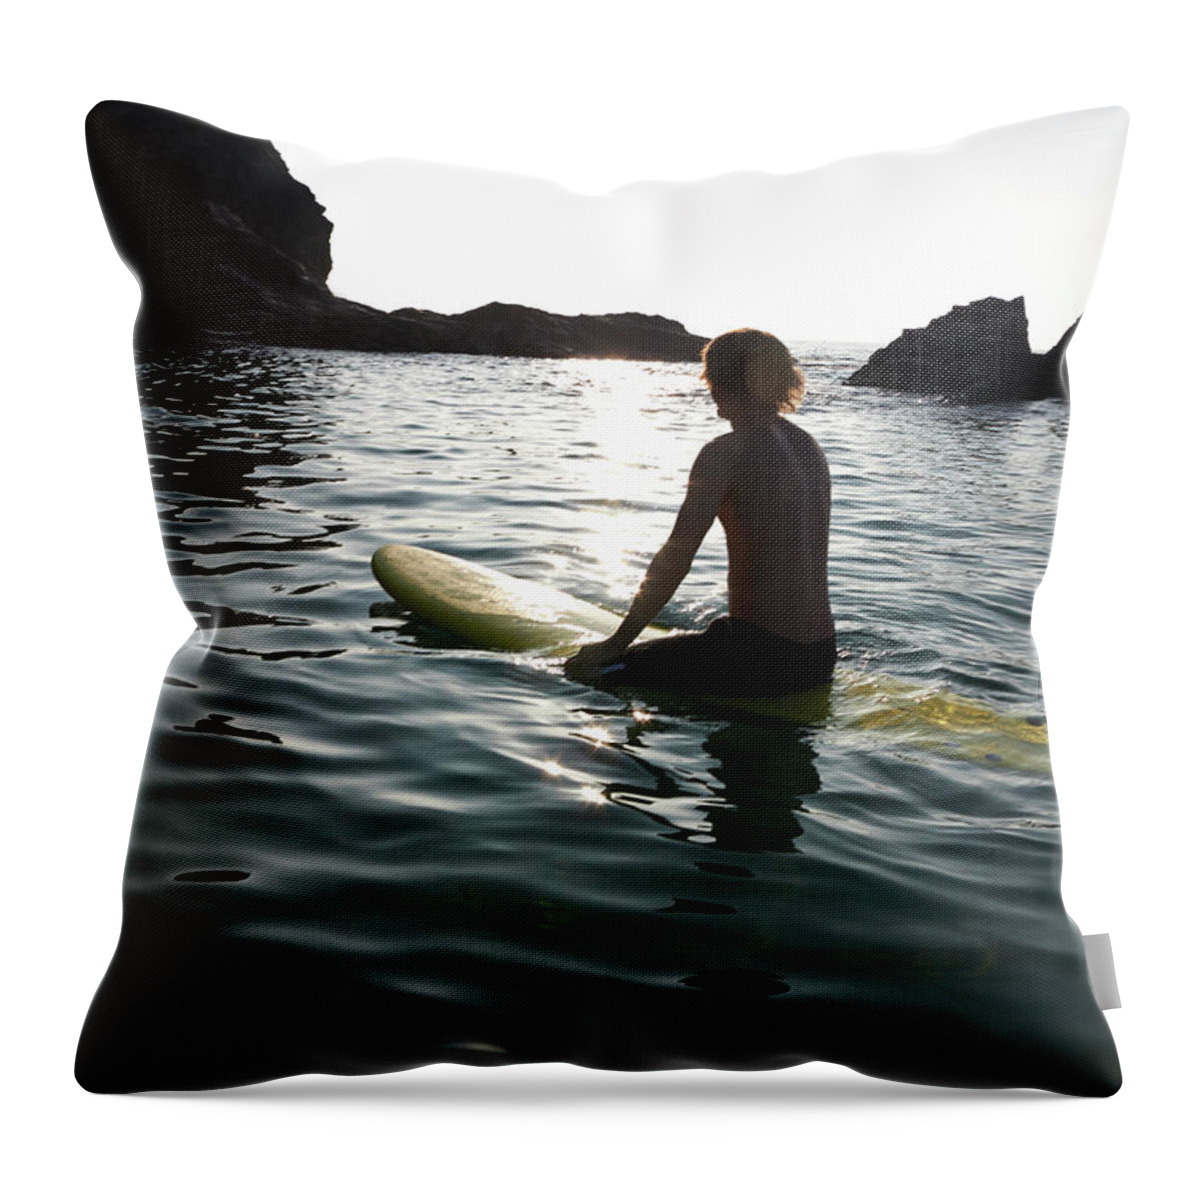 Tranquility Throw Pillow featuring the photograph Man Sitting On Surf Board In Sea by Dougal Waters